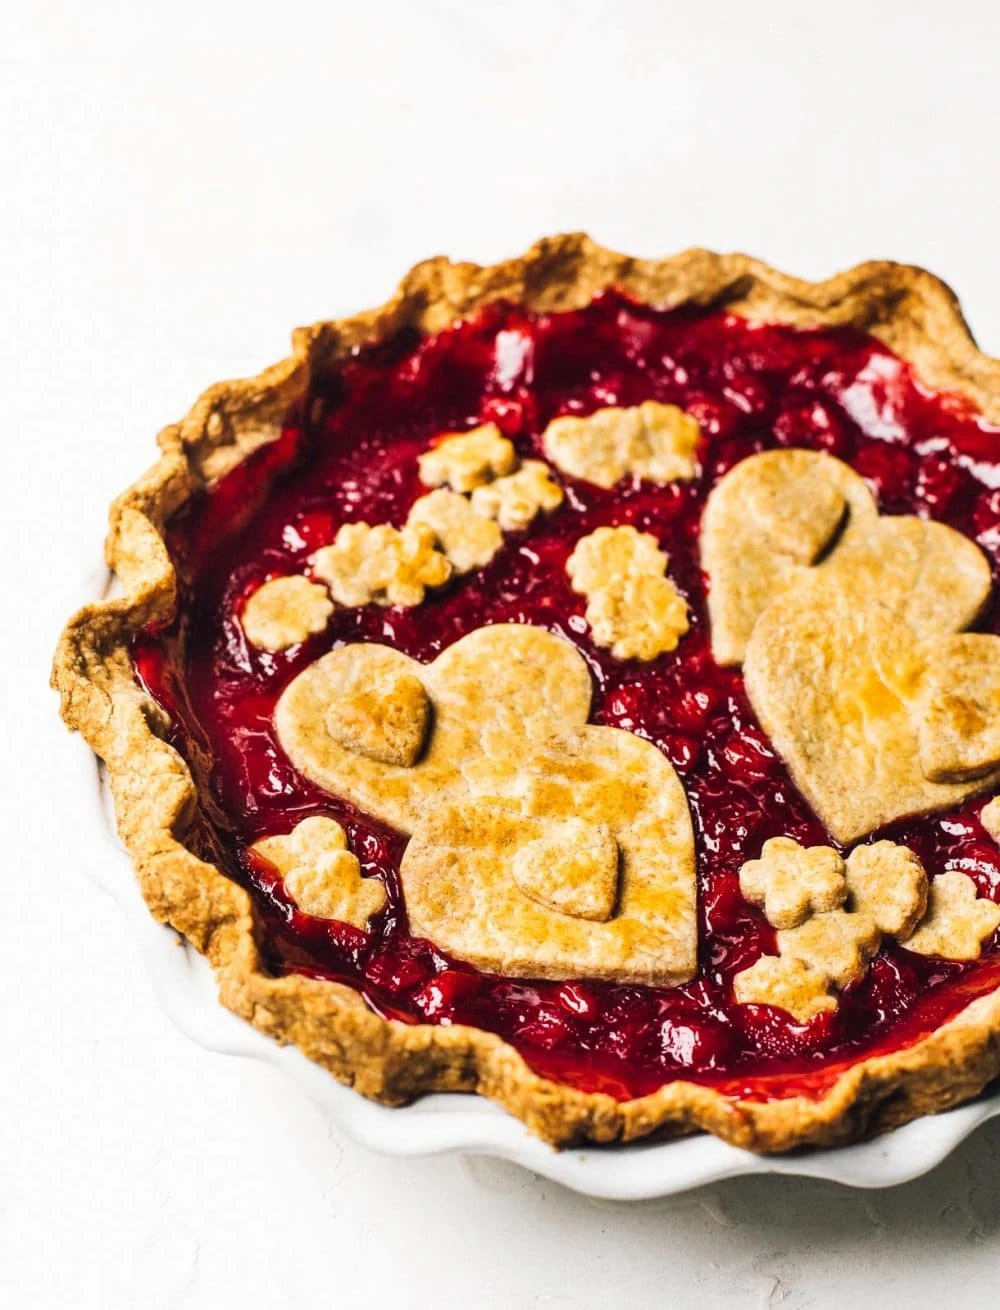 tart cherry pie in a white pie plate, with heart shapes on top cut from pastry